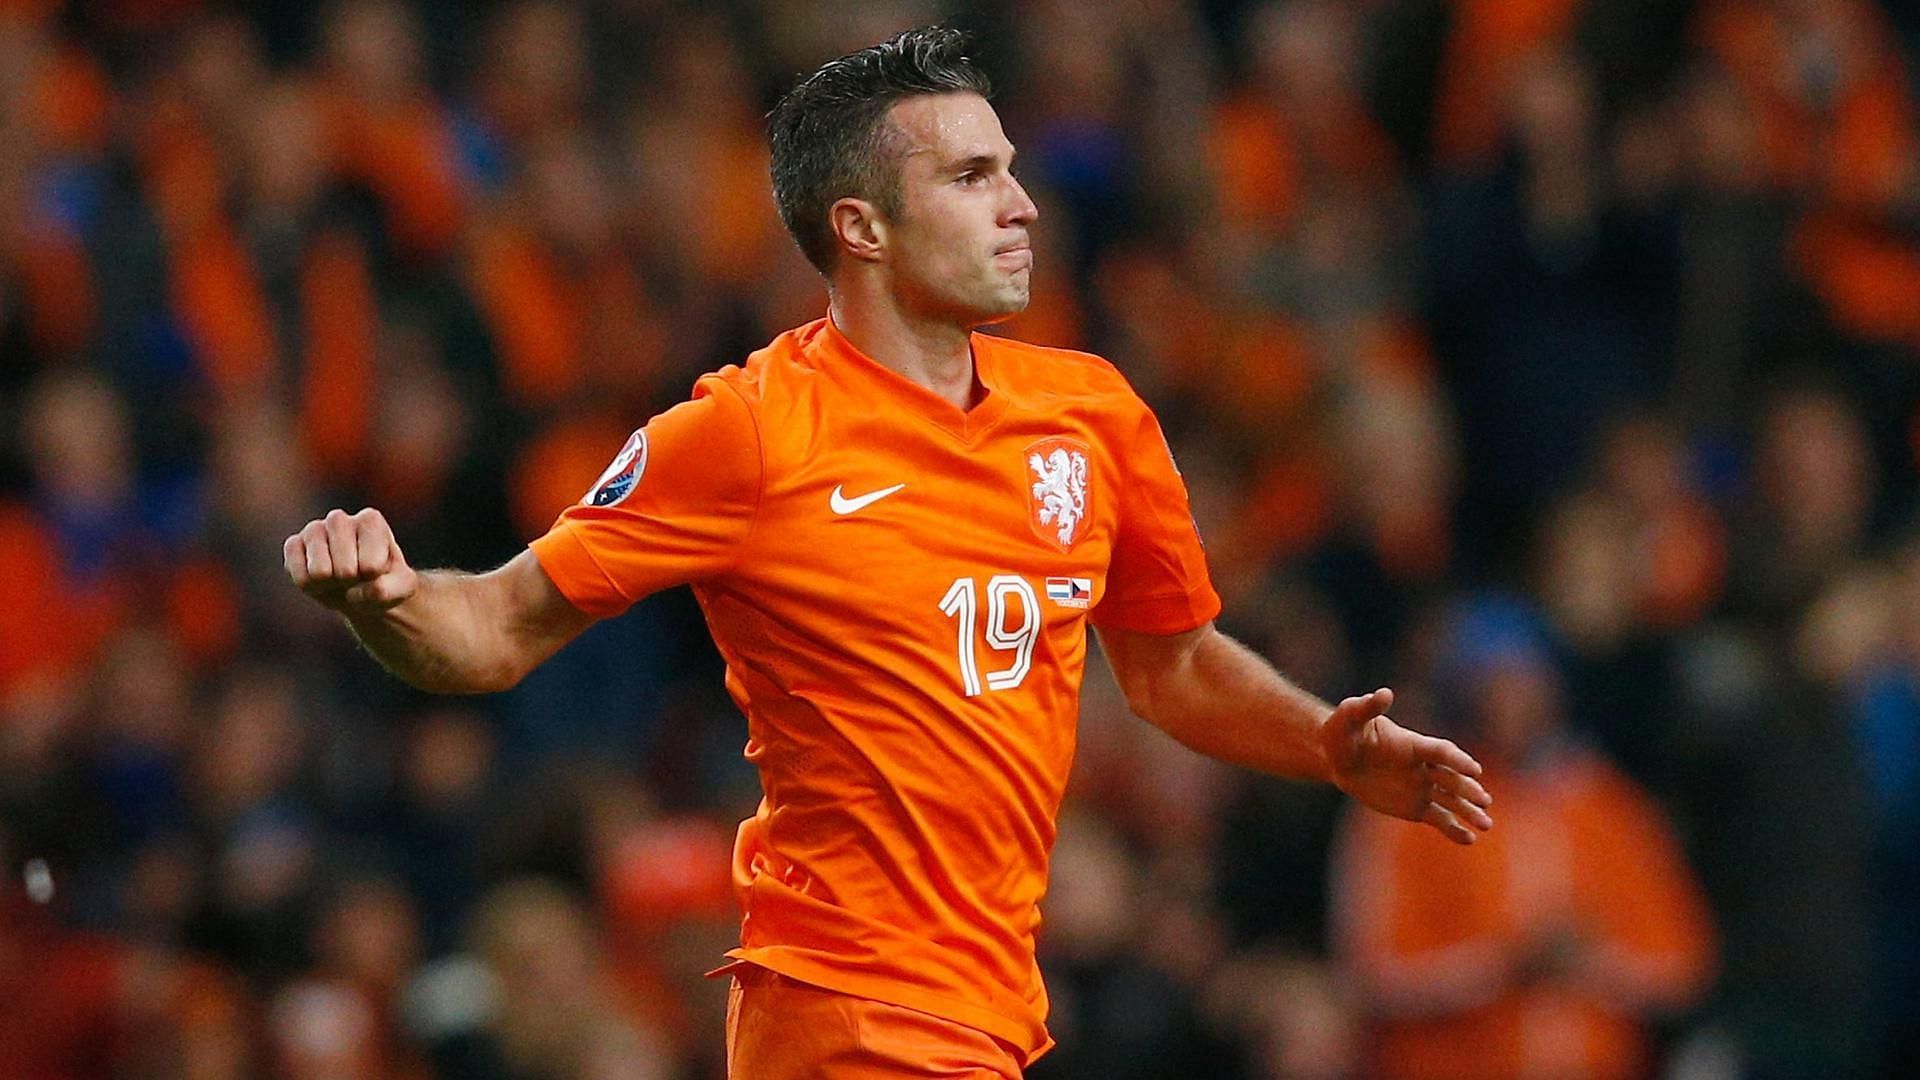 Robin van Persie is one of the most accomplished strikers of his generation.